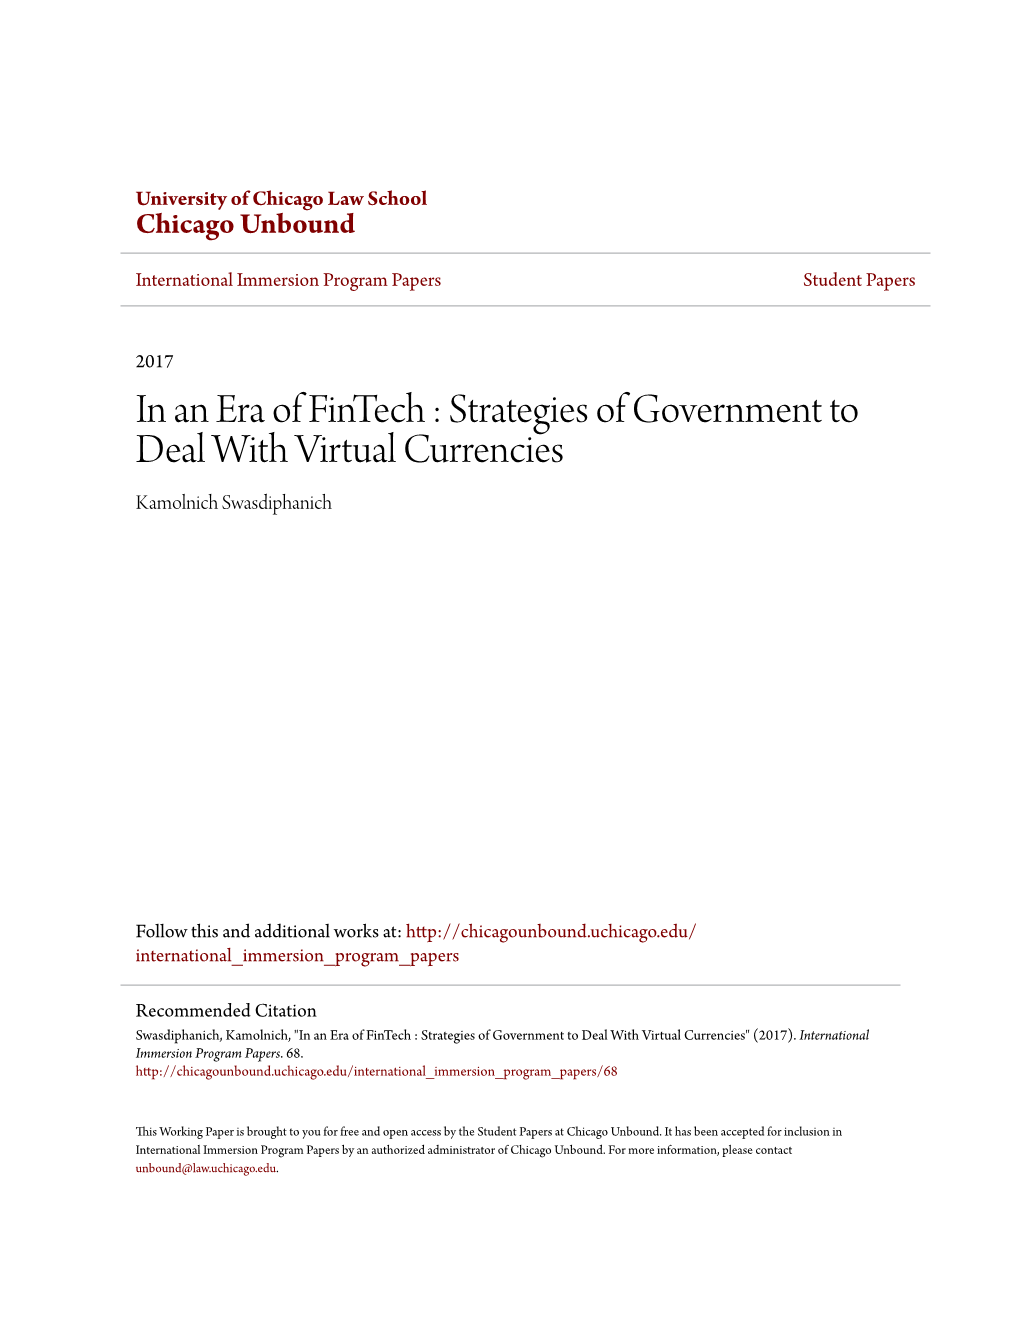 In an Era of Fintech : Strategies of Government to Deal with Virtual Currencies Kamolnich Swasdiphanich